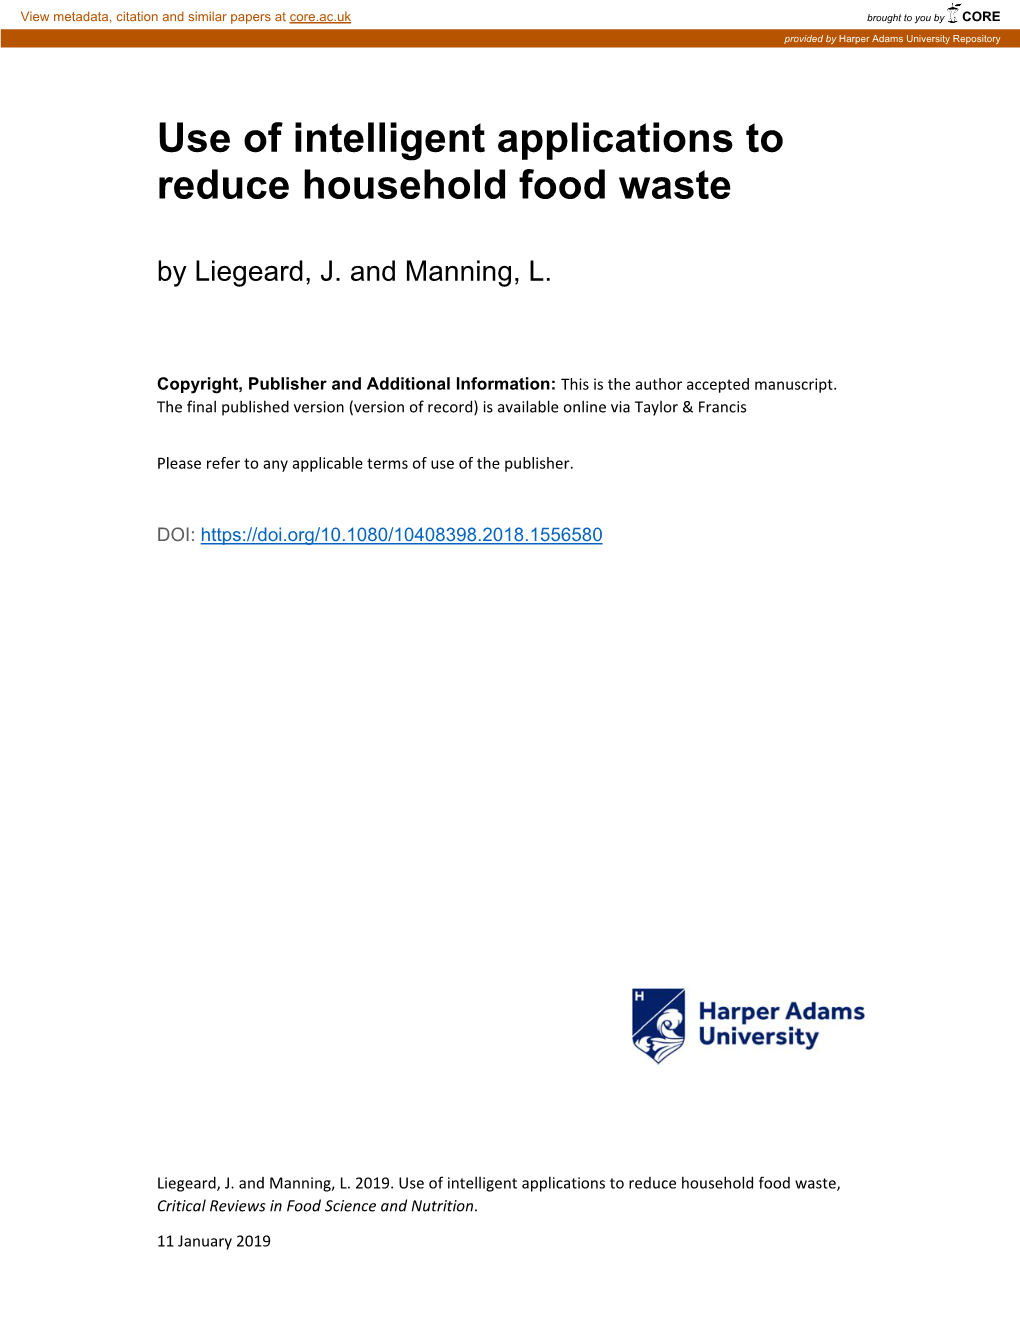 Use of Intelligent Applications to Reduce Household Food Waste